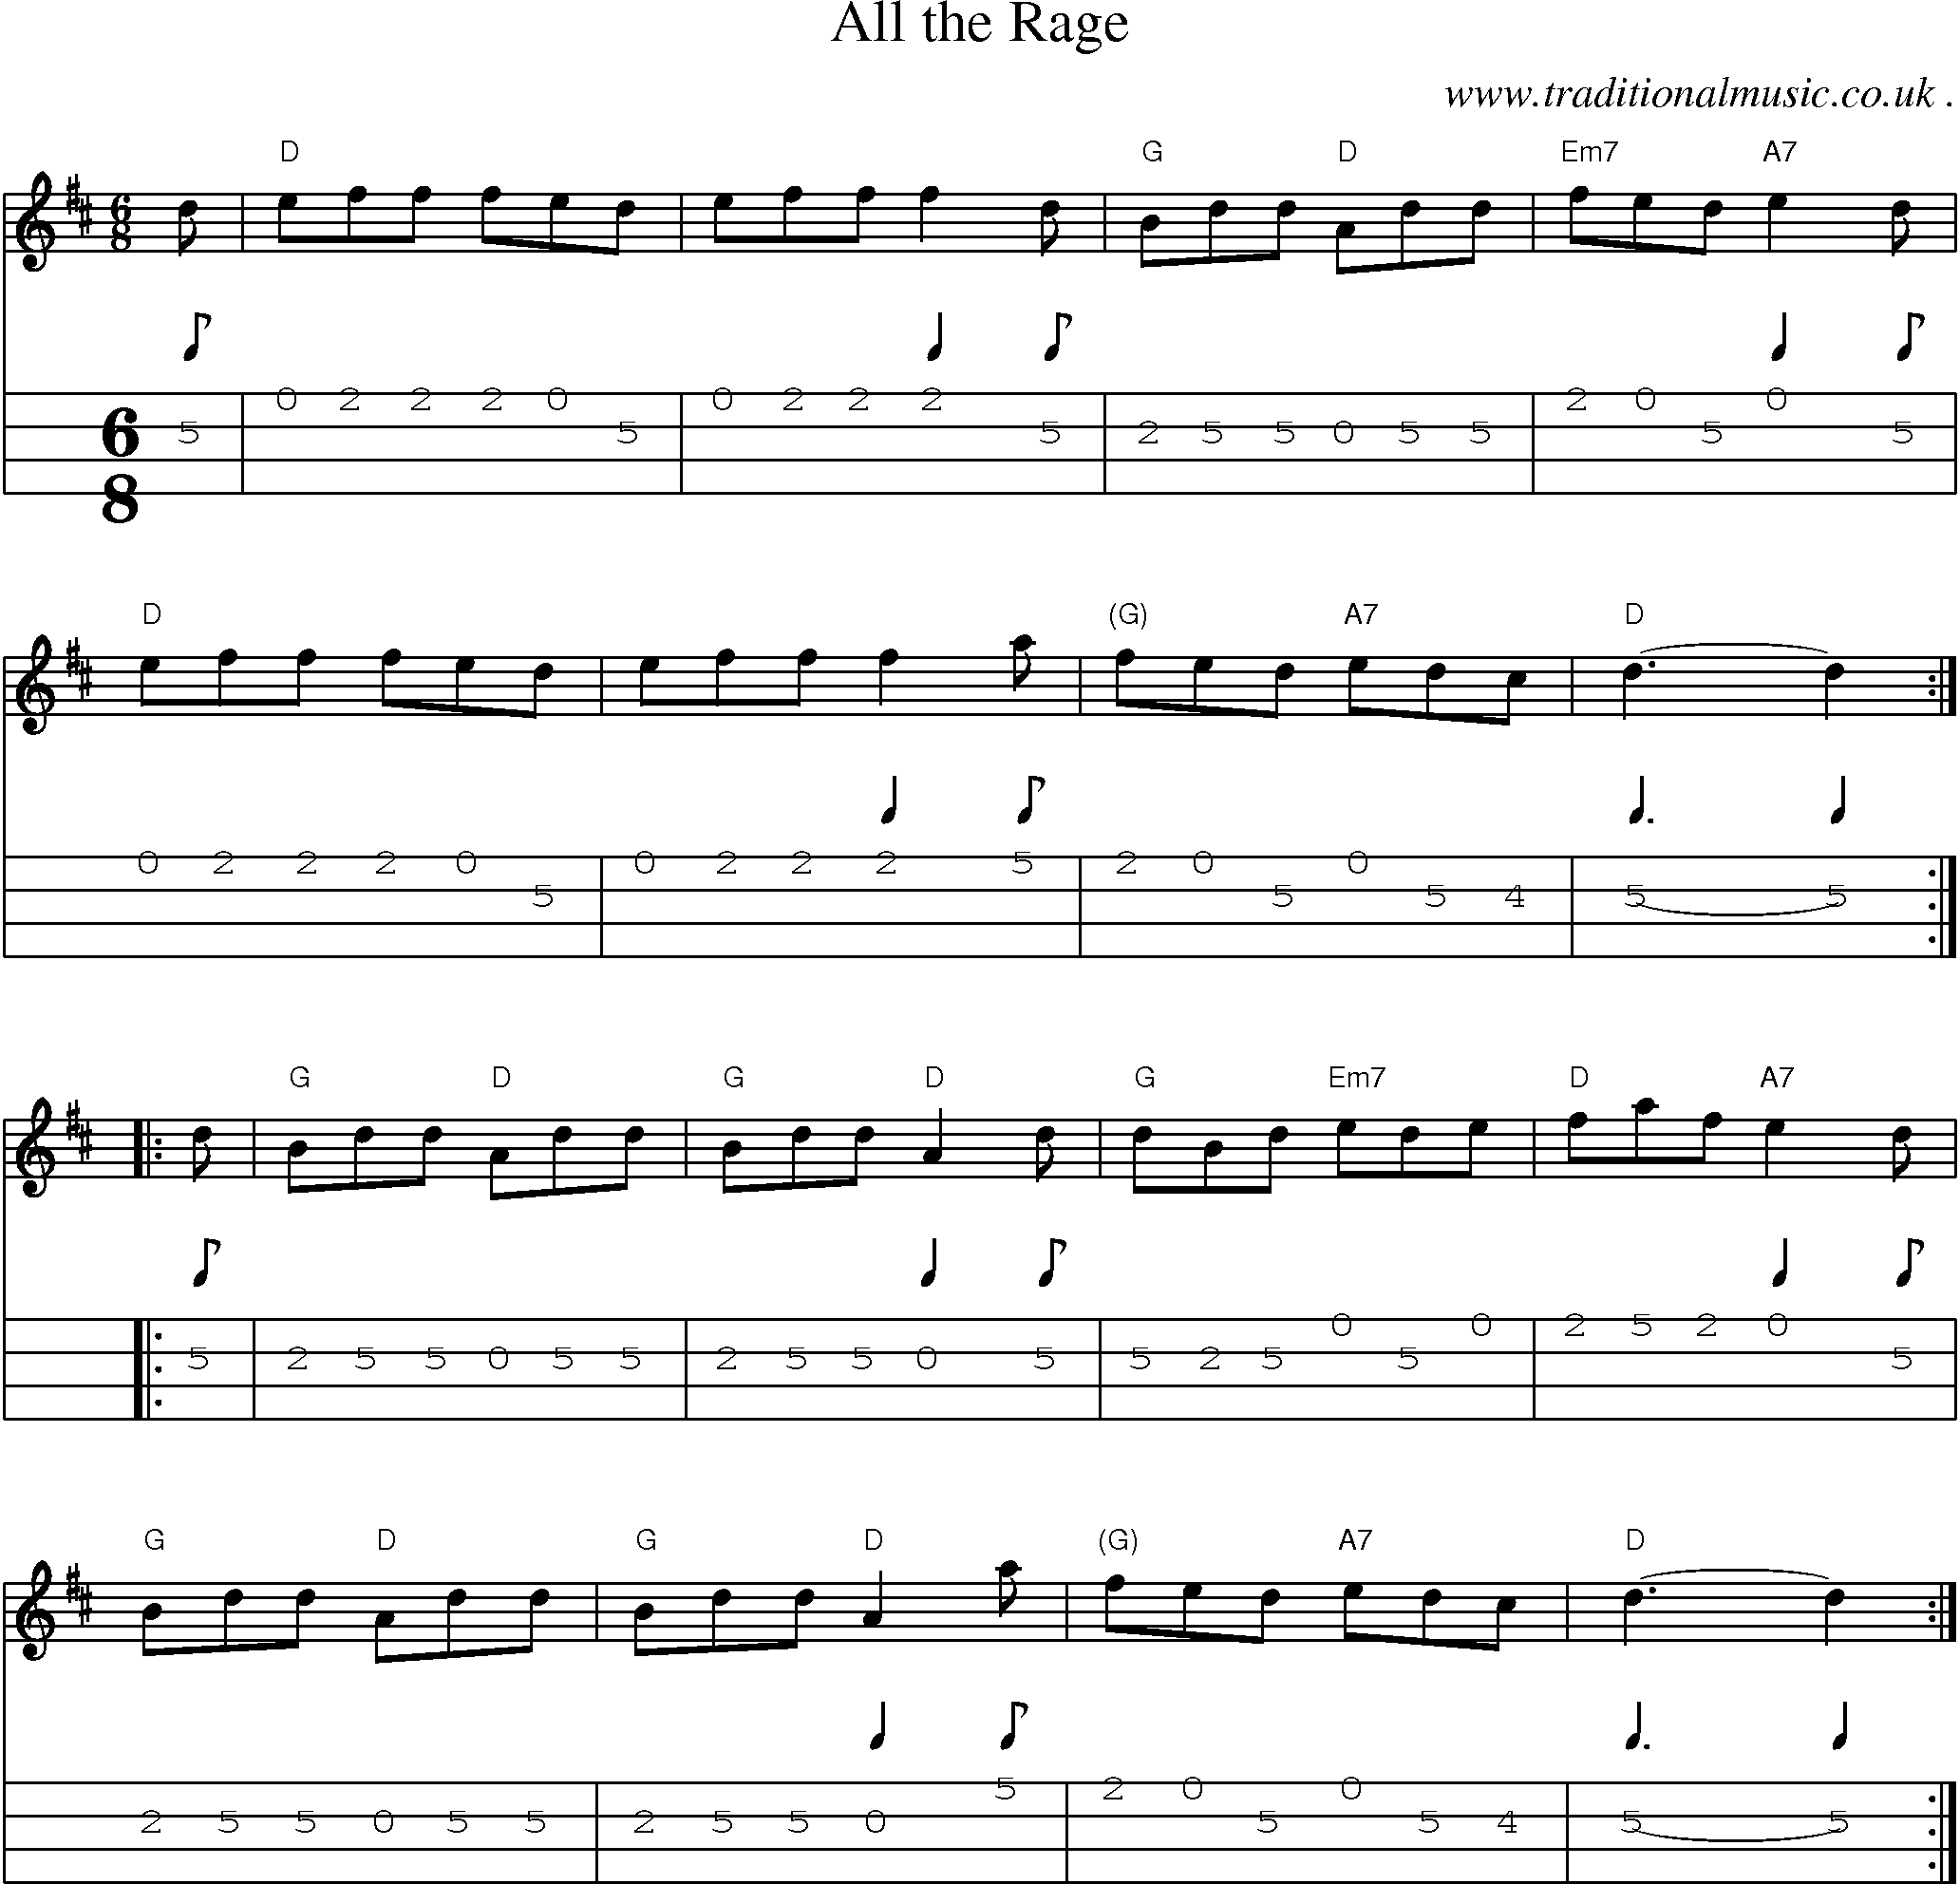 Music Score and Guitar Tabs for All The Rage